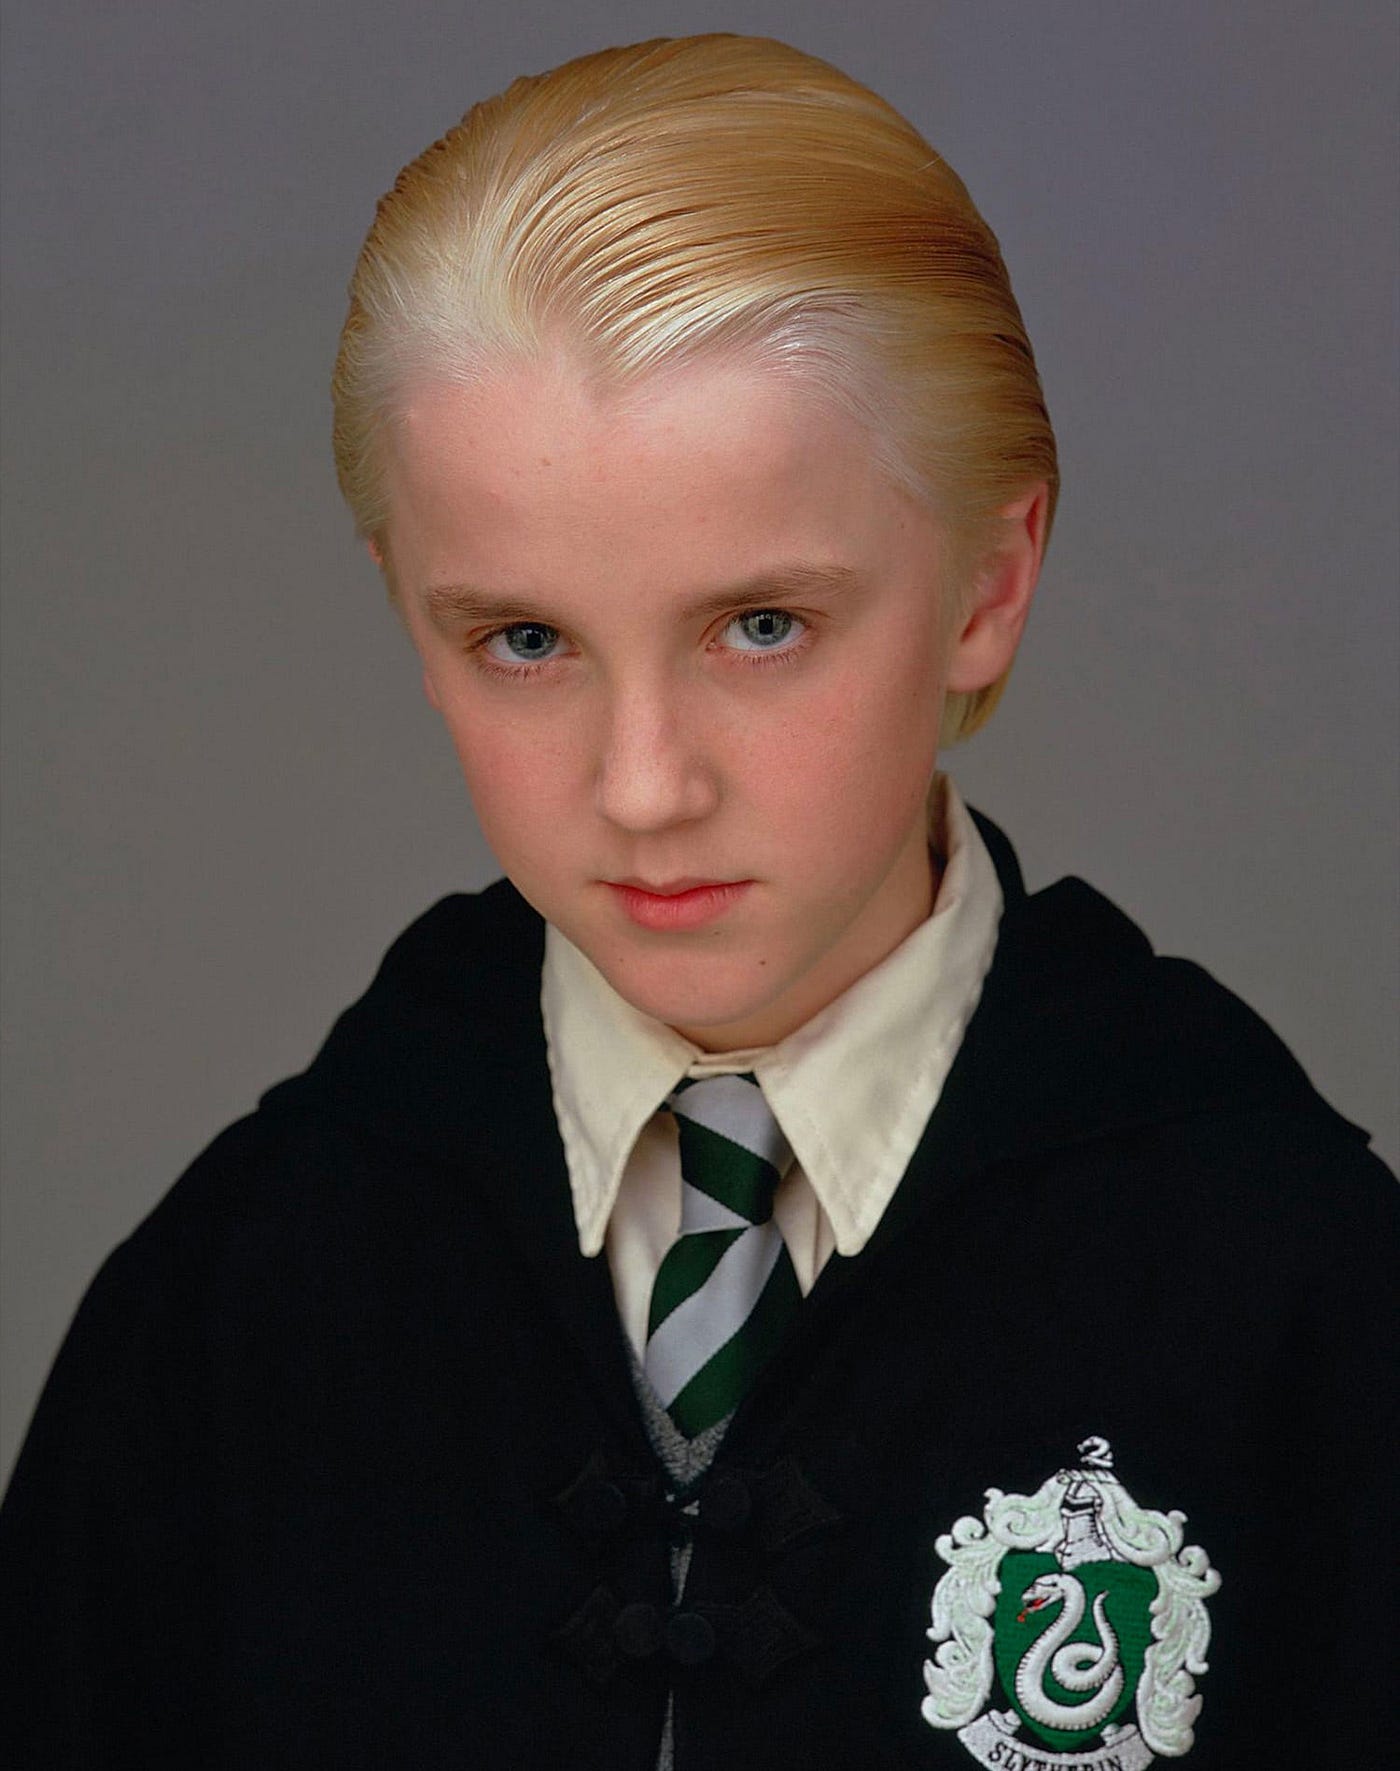 Draco Malfoy: The Complex Journey of a Troubled Soul